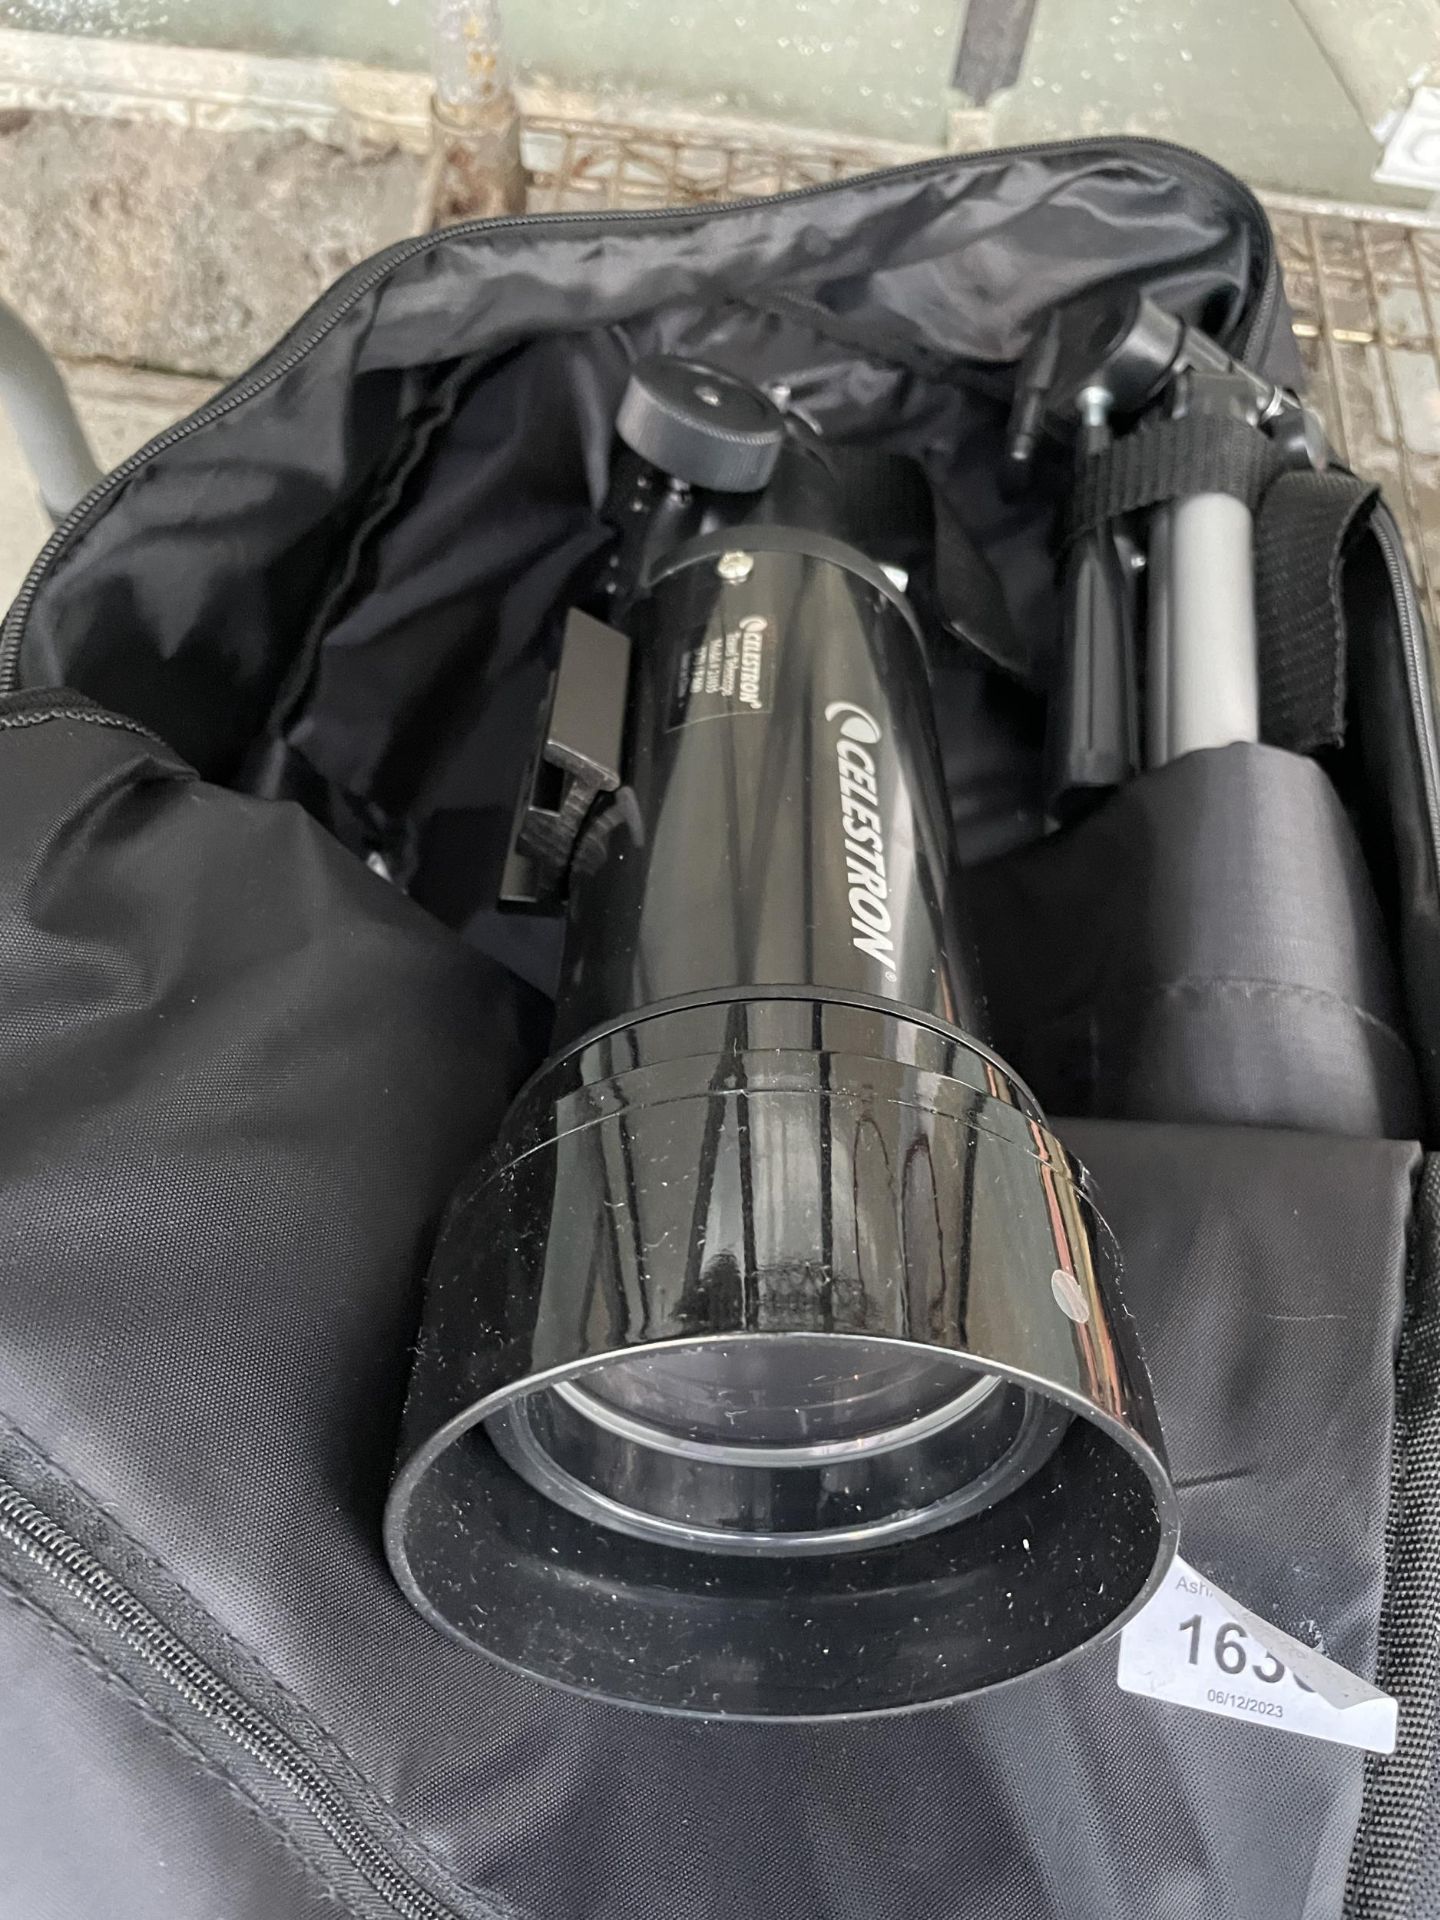 A CELESTRON TRAVEL TELESCOPE WITH CARRY BAG AND MANUAL - Image 2 of 4